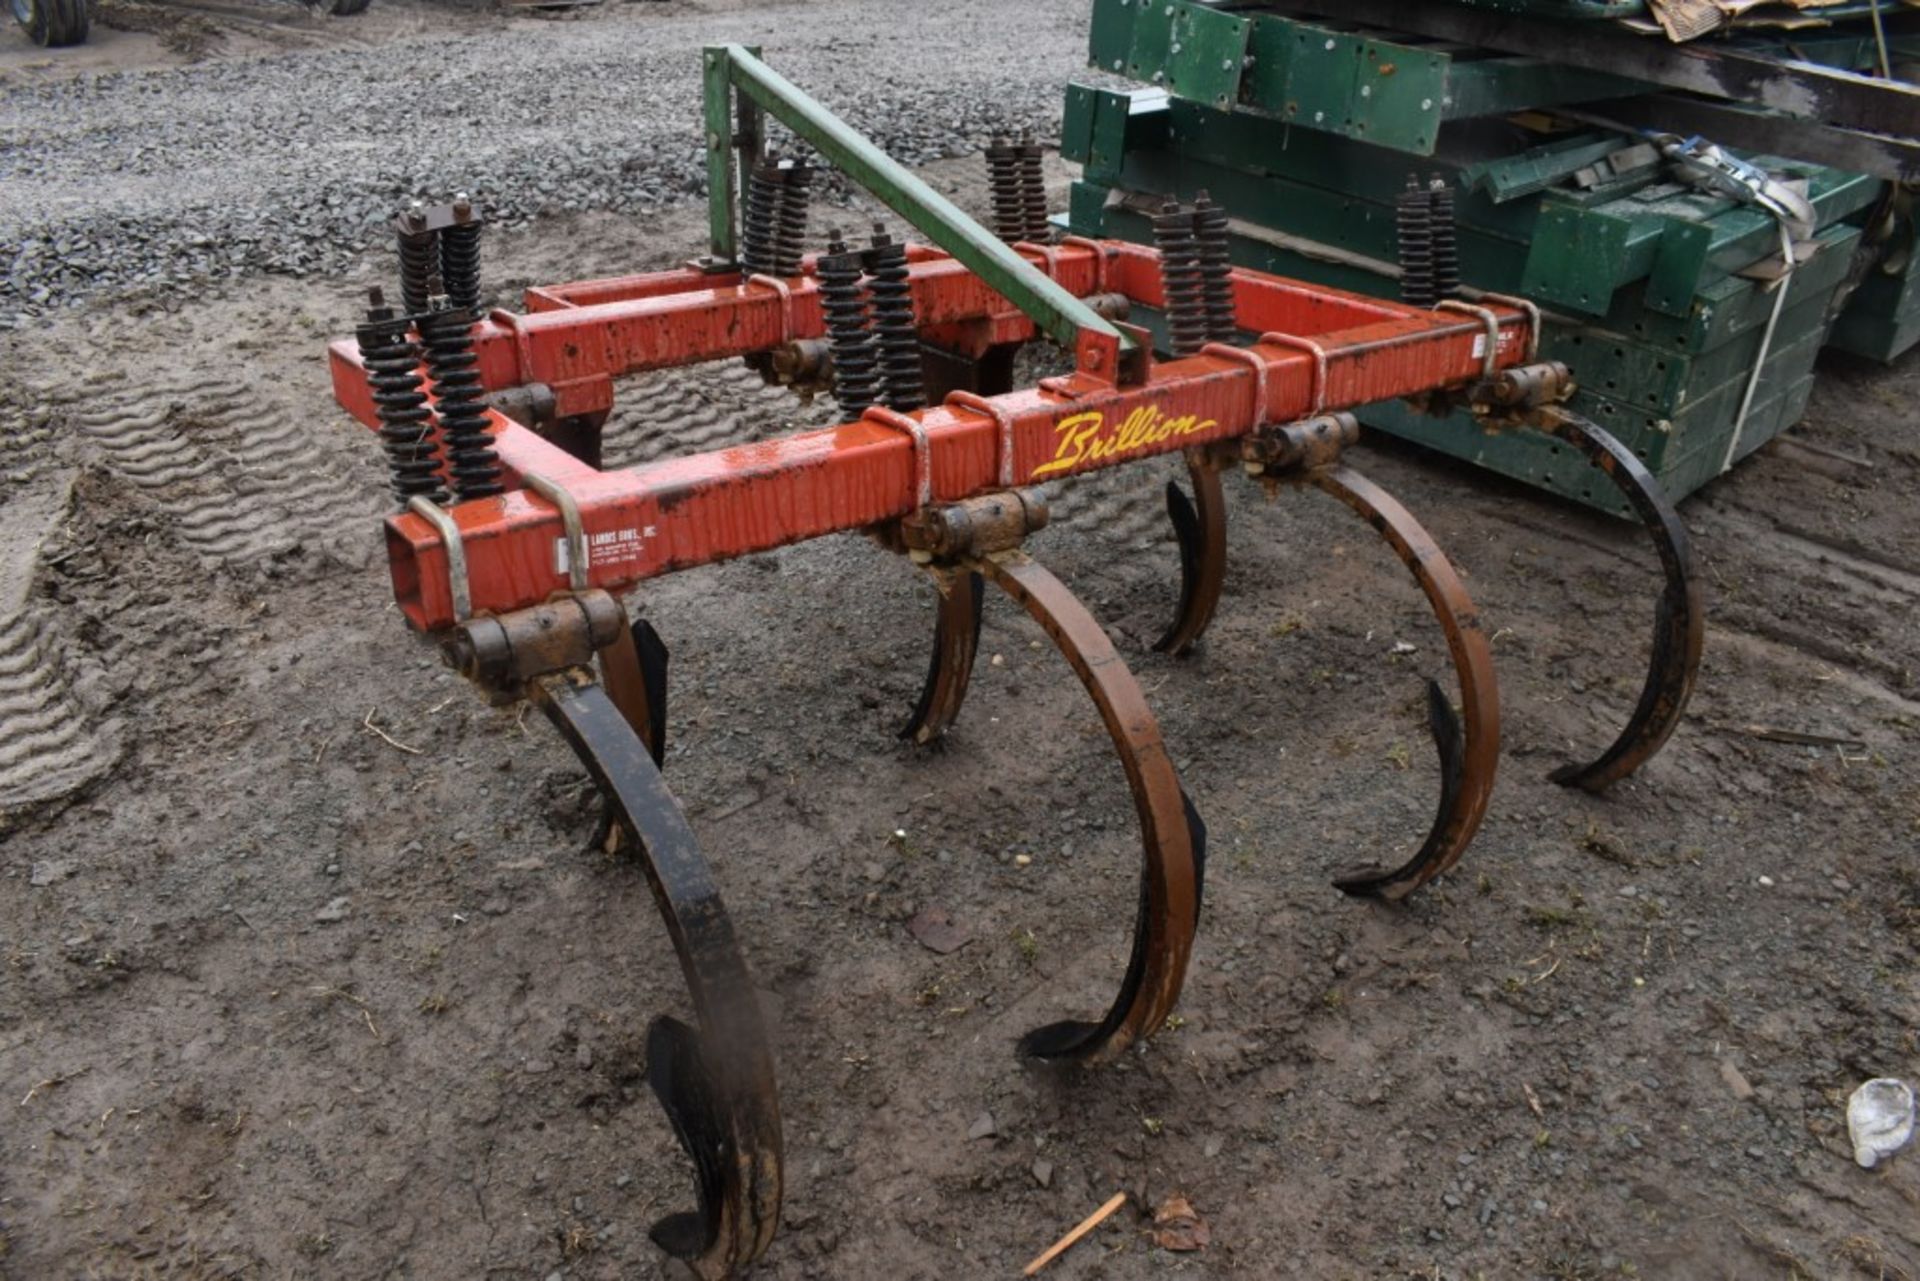 Brillion Cpp-02 7 Shank 3 Point Chisel Plow - Image 7 of 8